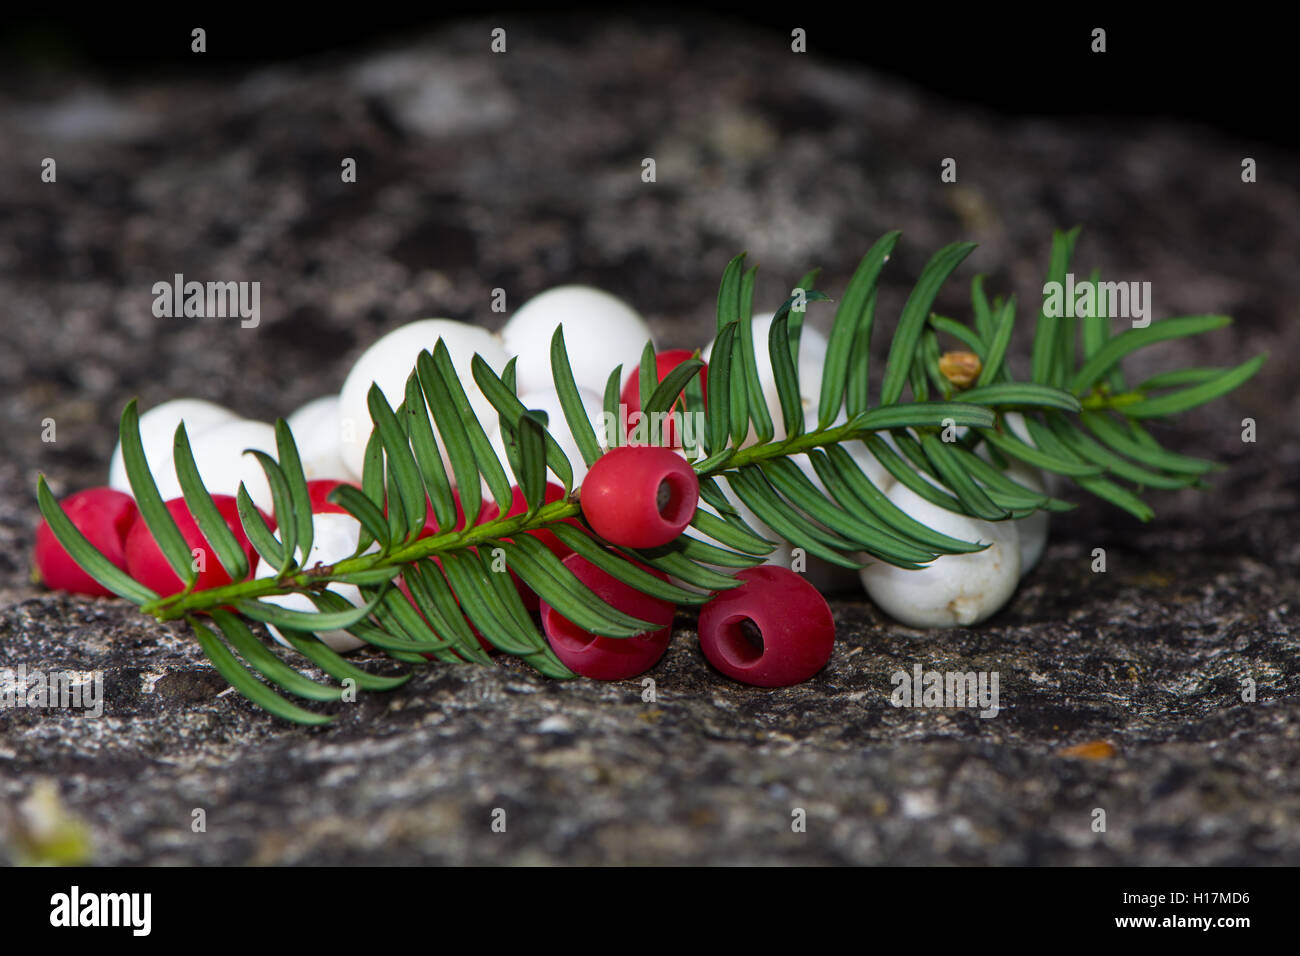 White snowberries and red yew berries arranged on stone. Yew (Taxus baccata) and common snowberry fruits with leaves Stock Photo